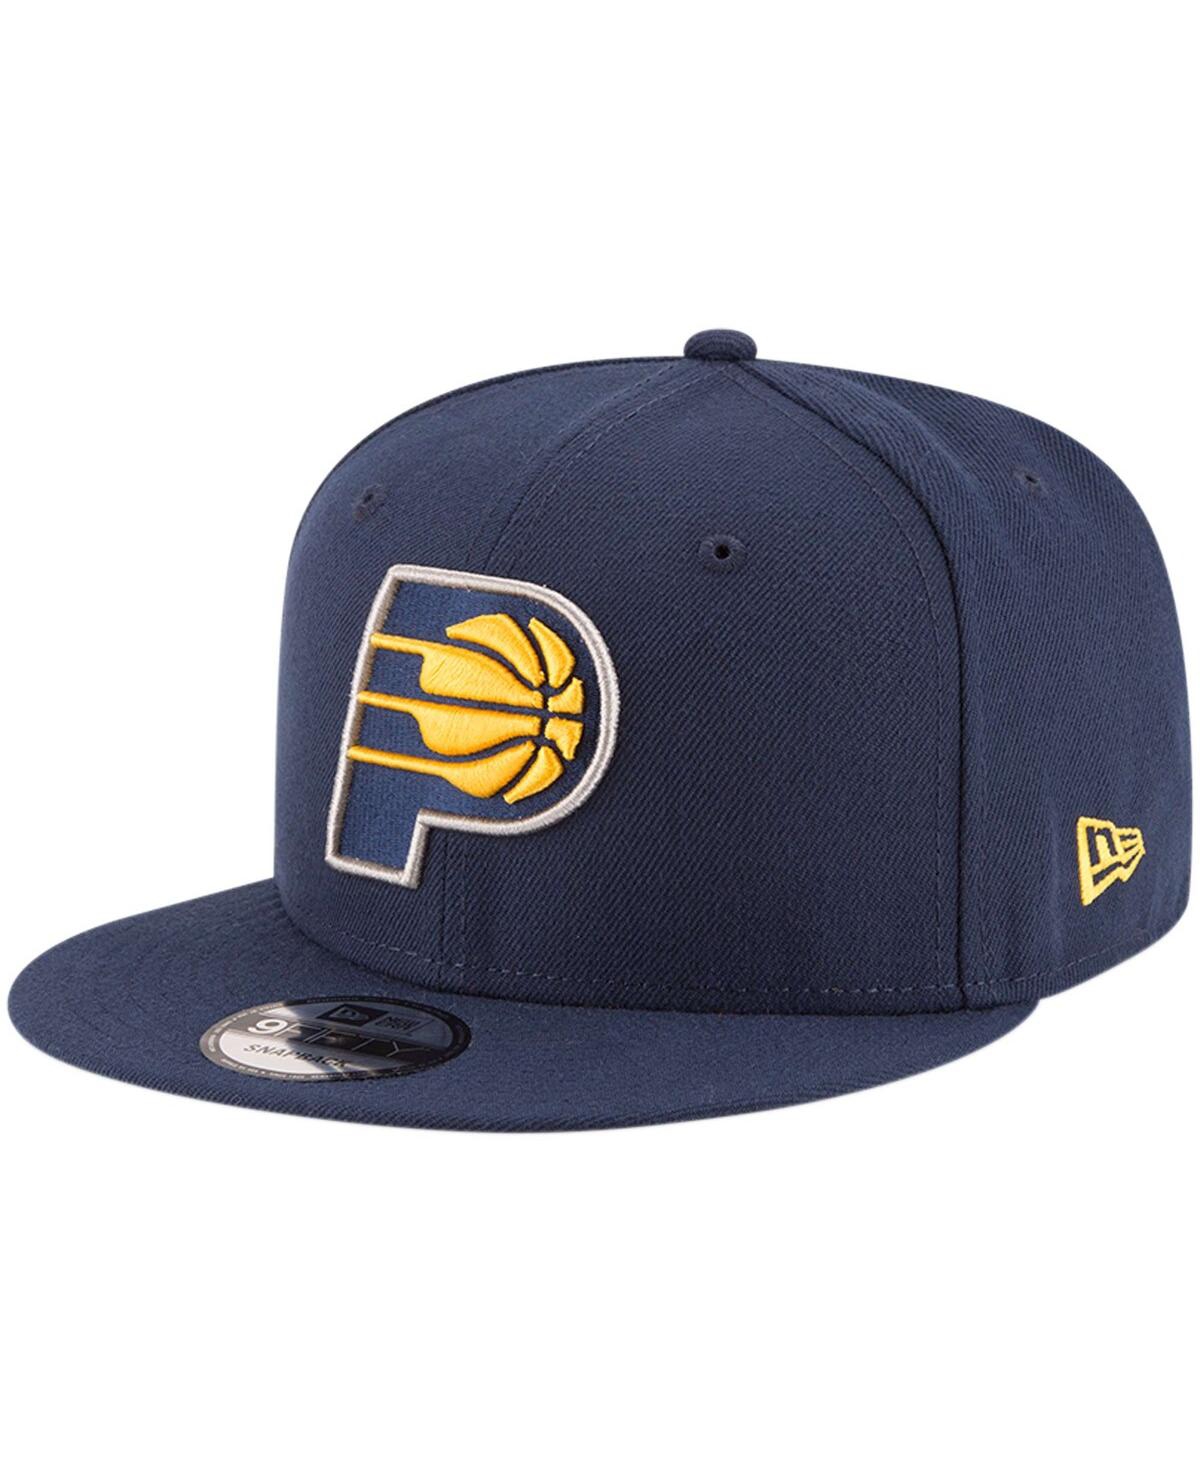 Shop New Era Men's  Navy Indiana Pacers Official Team Color 9fifty Snapback Hat